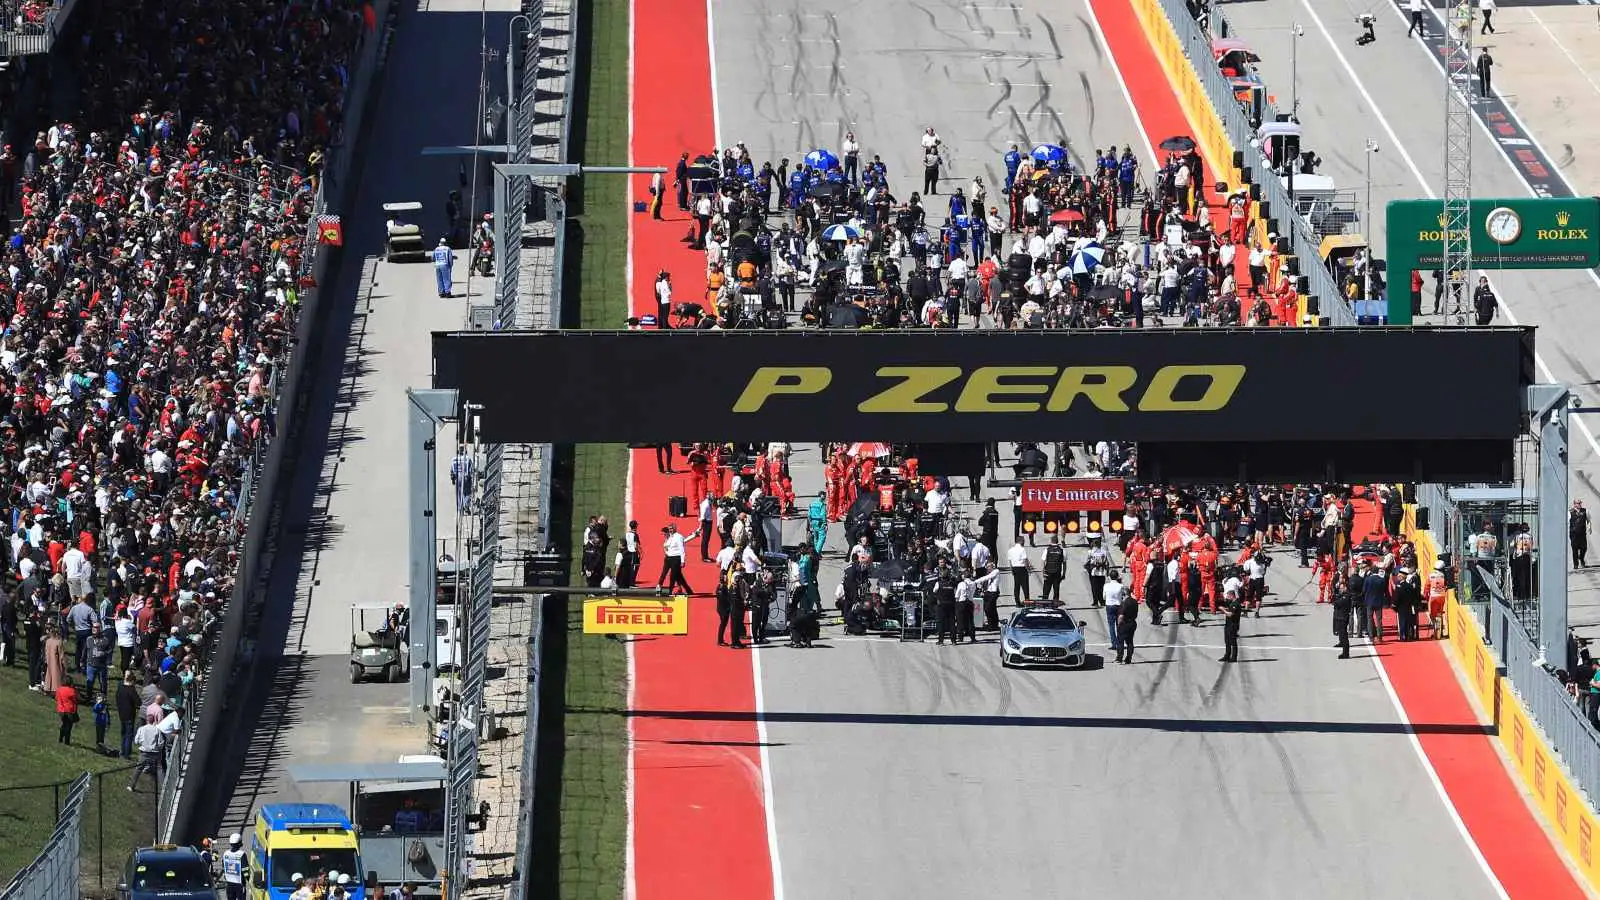 The grid before the start of the 2018 United States Grand Prix. Circuit of the Americas, Austin, Texas, United States, October 2018